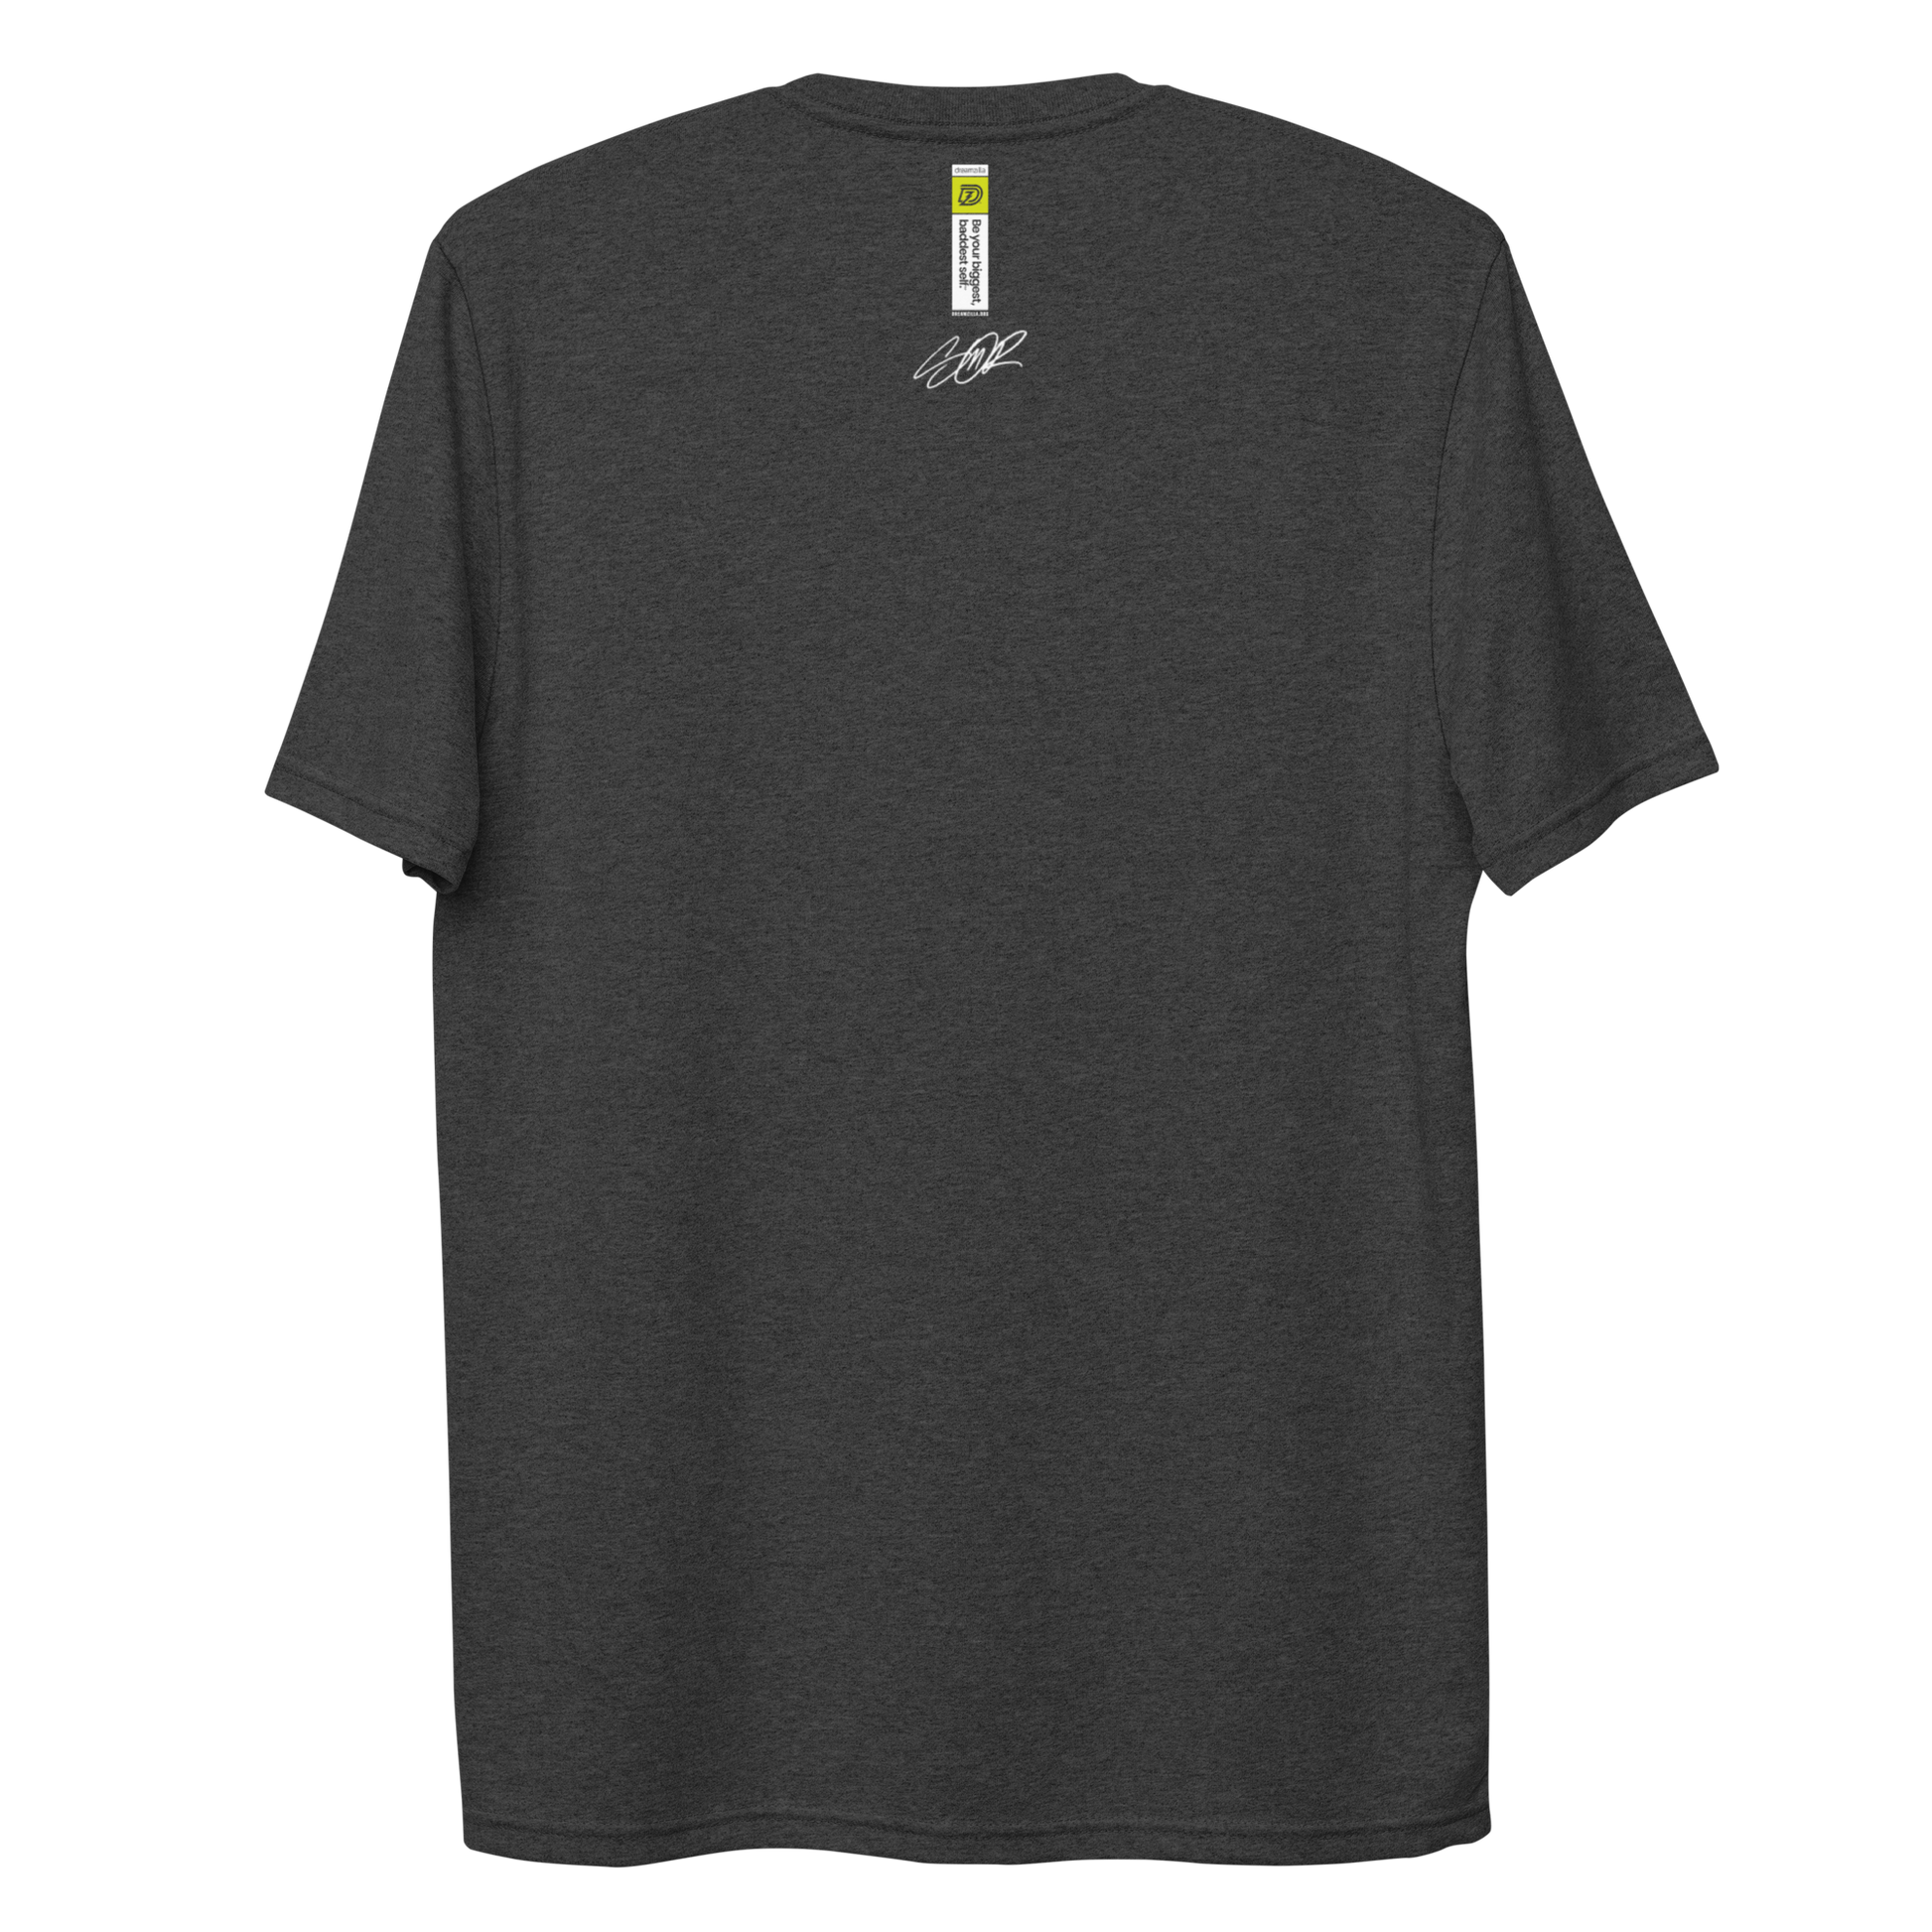 Back of Graffiti Wildstyle 2 by Sanitor Unisex Recycled Short Sleeve Tee in Charcoal Heather